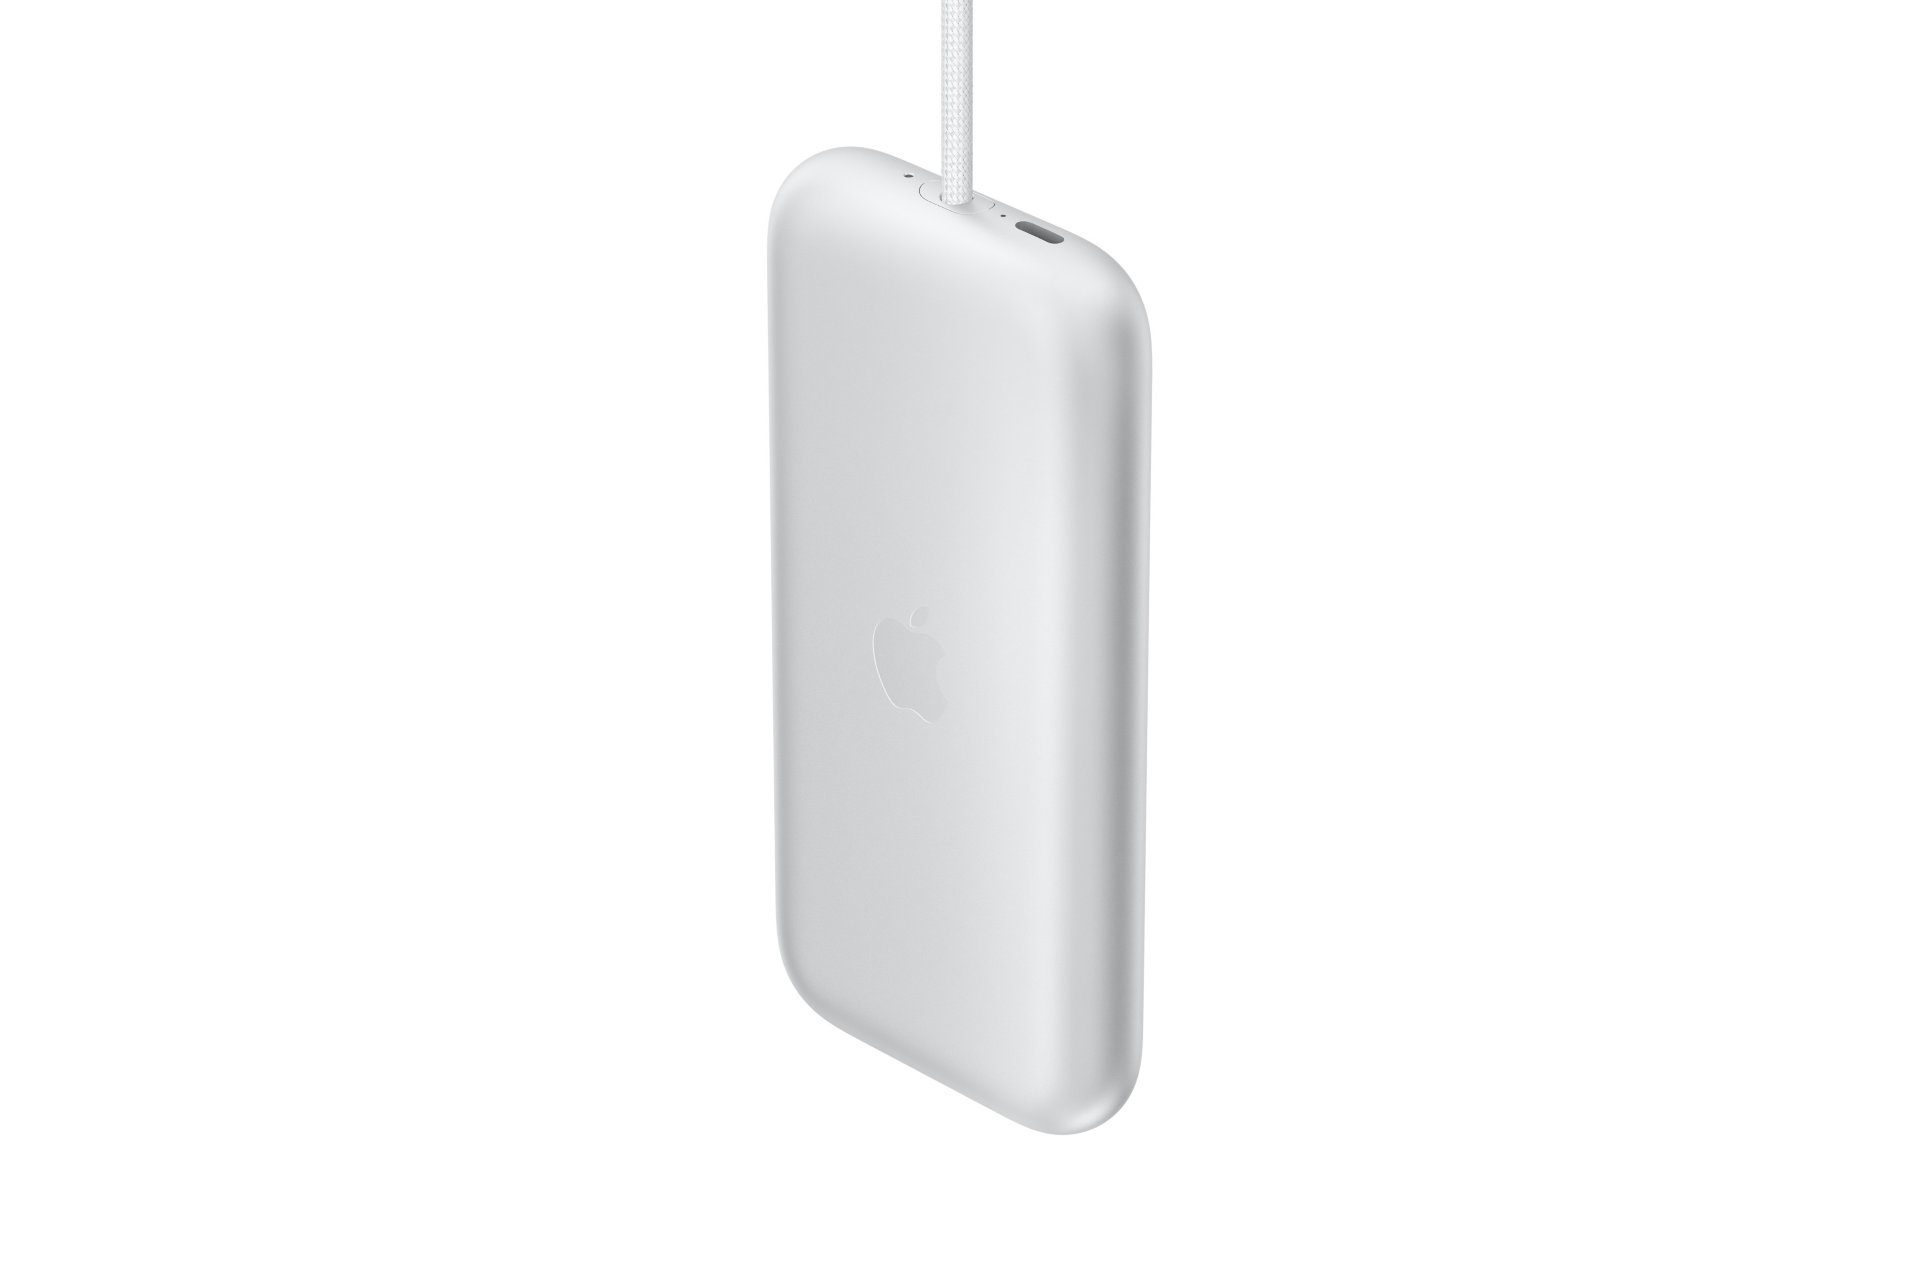 The Apple Vision Pro Battery appears on a white background.